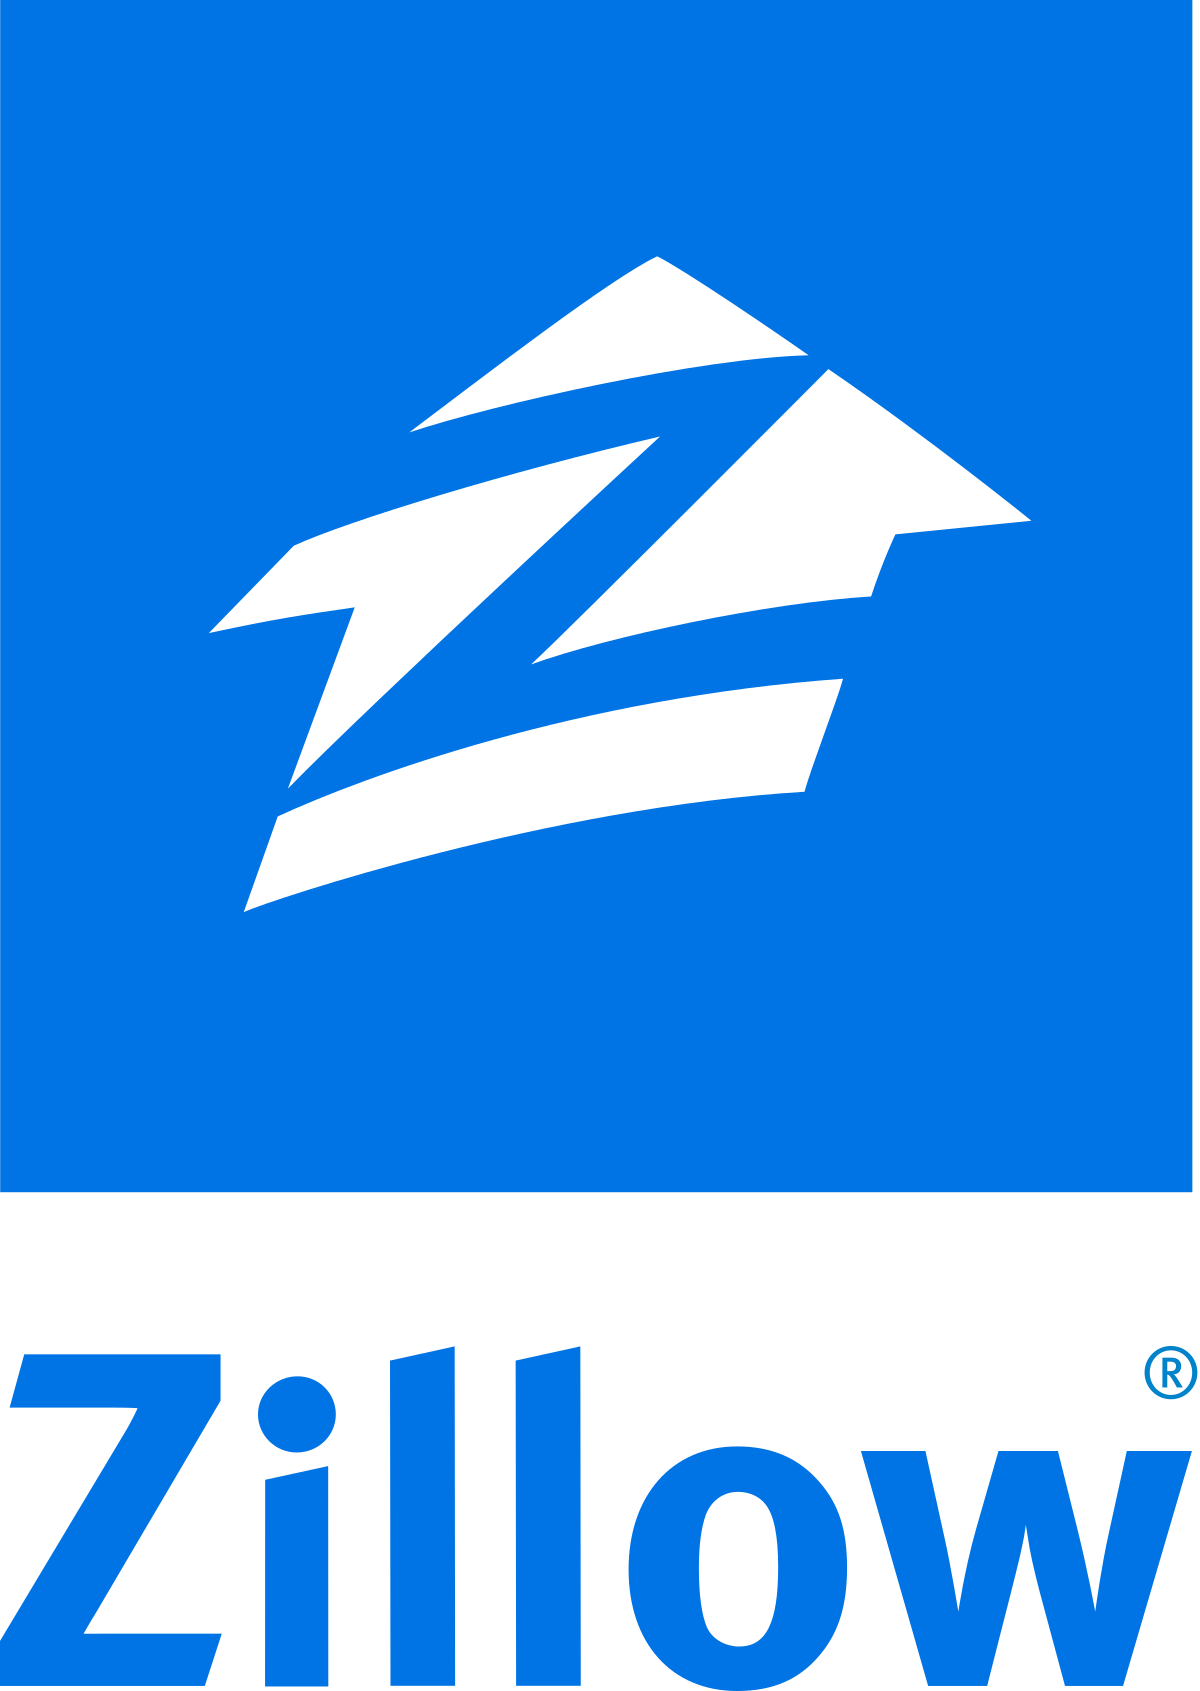 Zillow Mortgage Data Live on AOL Real Estate - Drew Meyers 